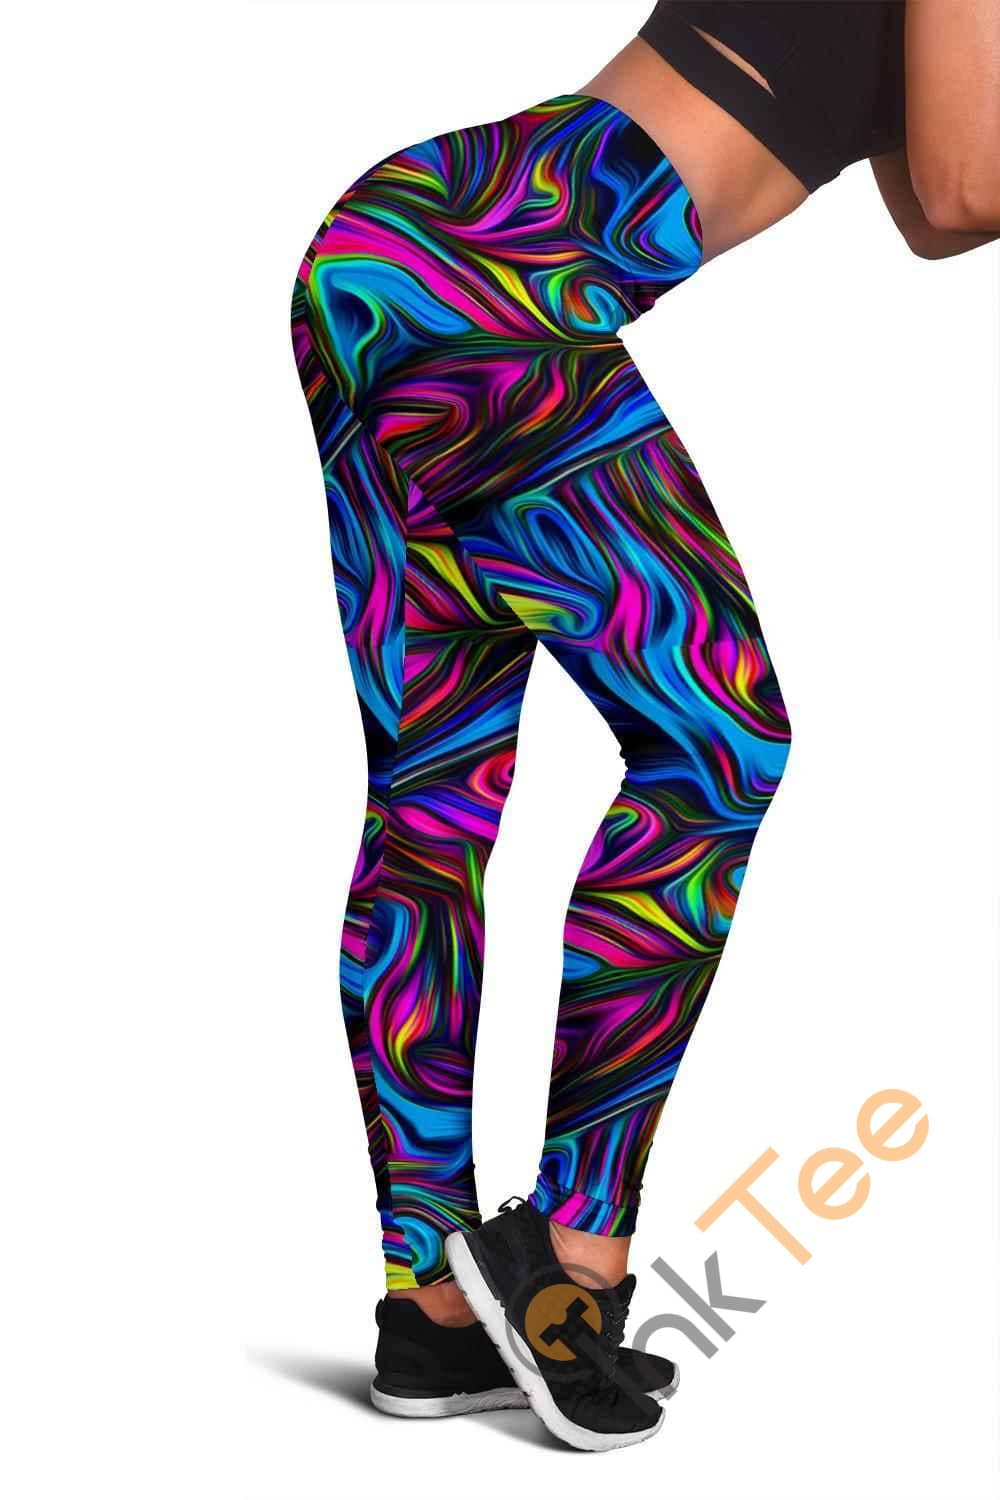 Inktee Store - Psychedelic Art 3D All Over Print For Yoga Fitness Women'S Leggings Image